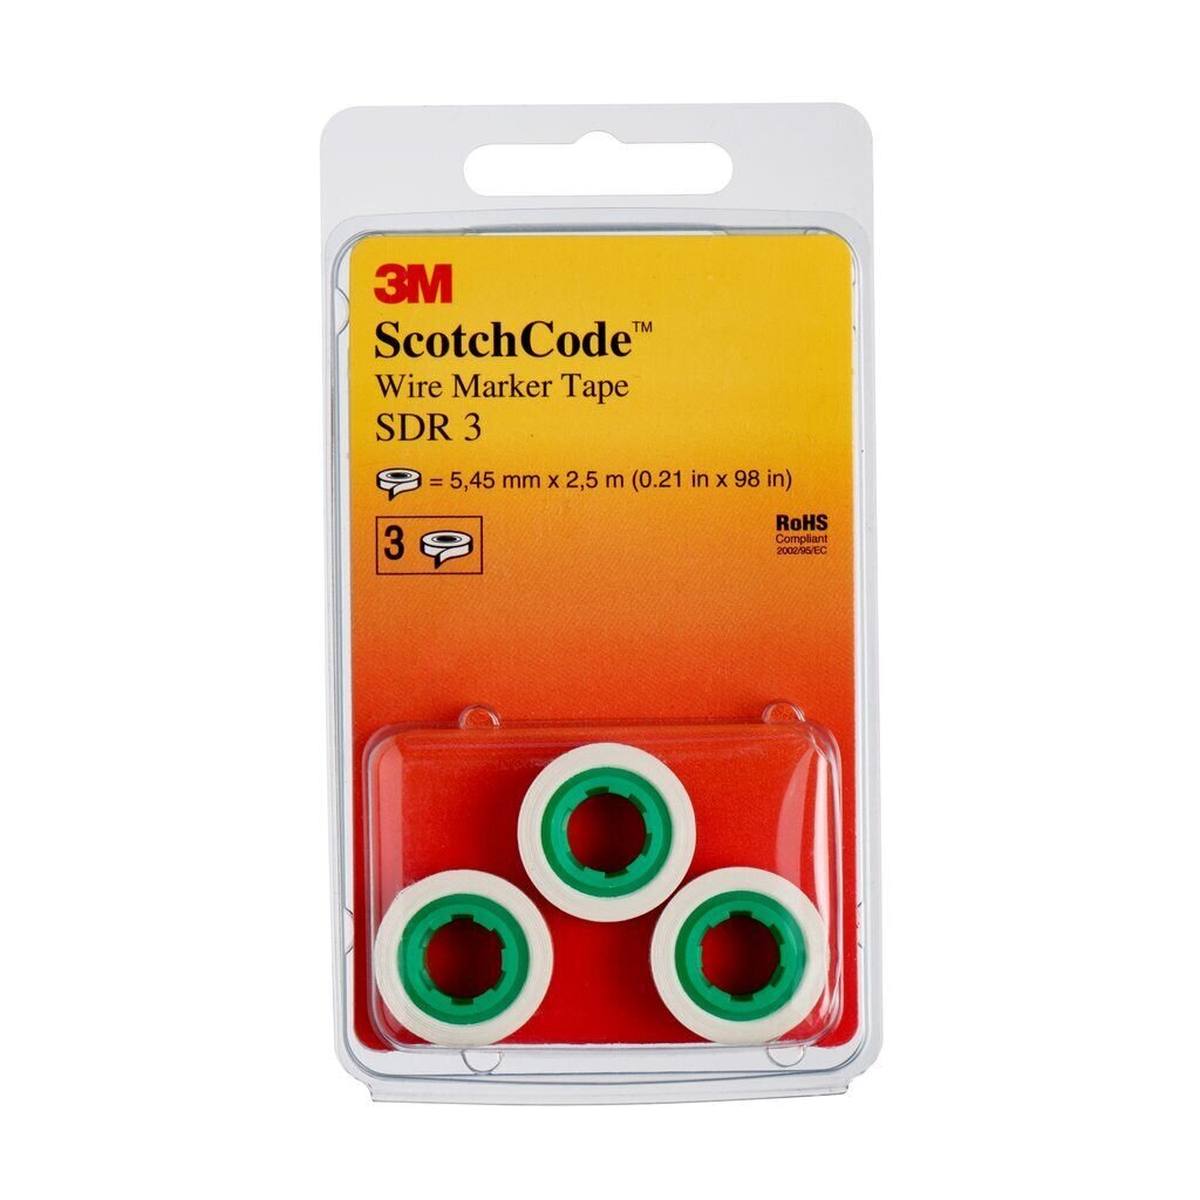 3M ScotchCode SDR-3 cable marker refill rolls, number 3, pack of 3